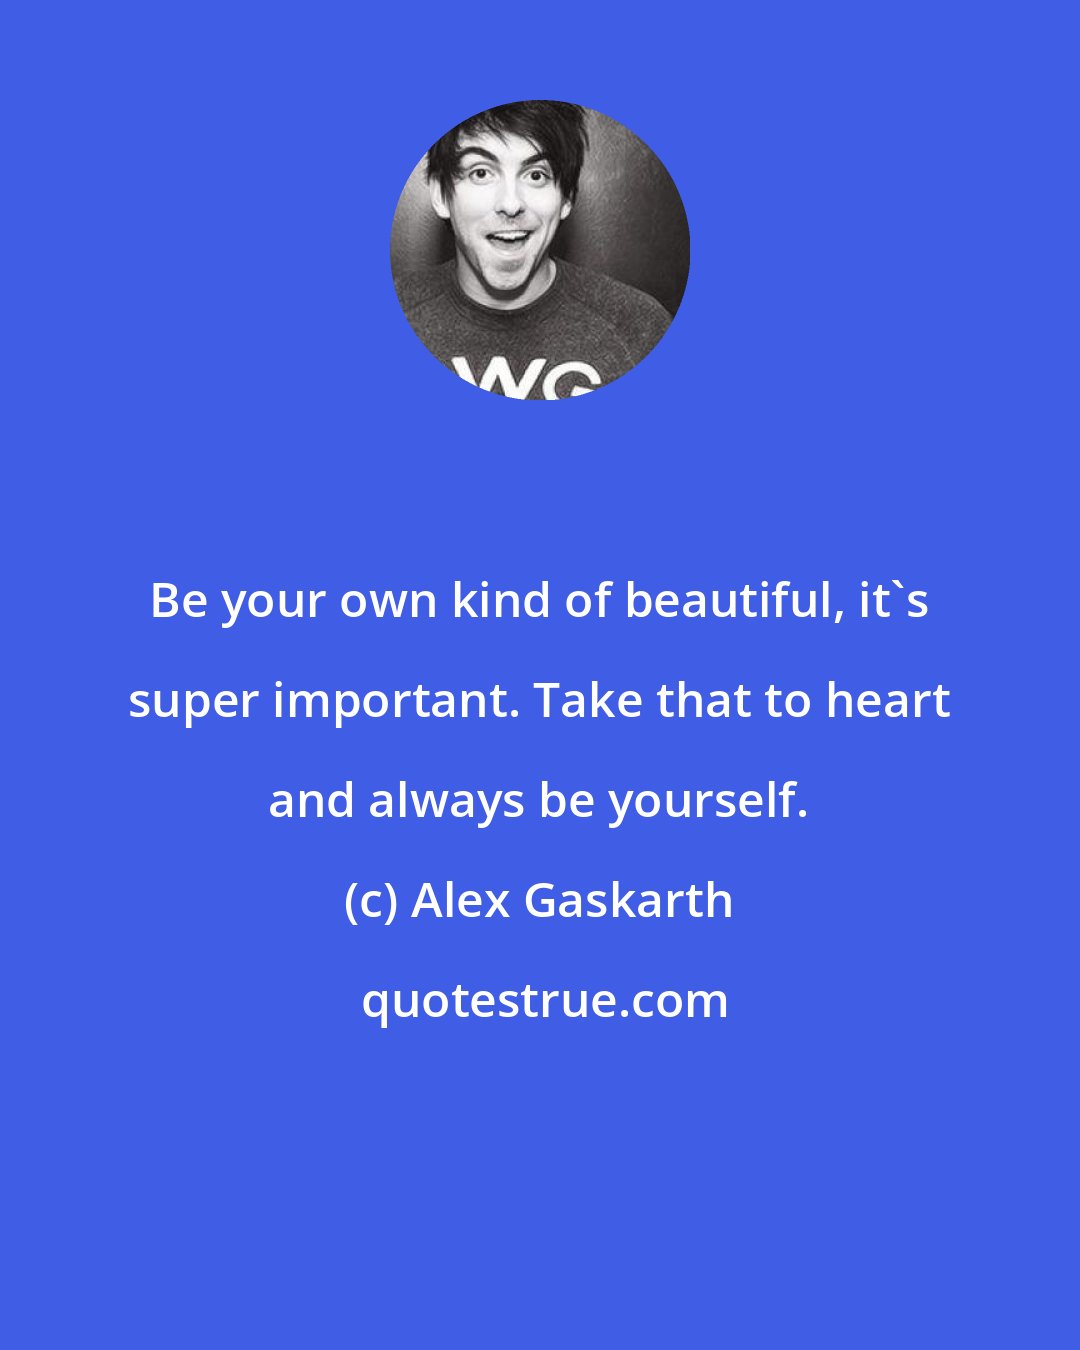 Alex Gaskarth: Be your own kind of beautiful, it's super important. Take that to heart and always be yourself.